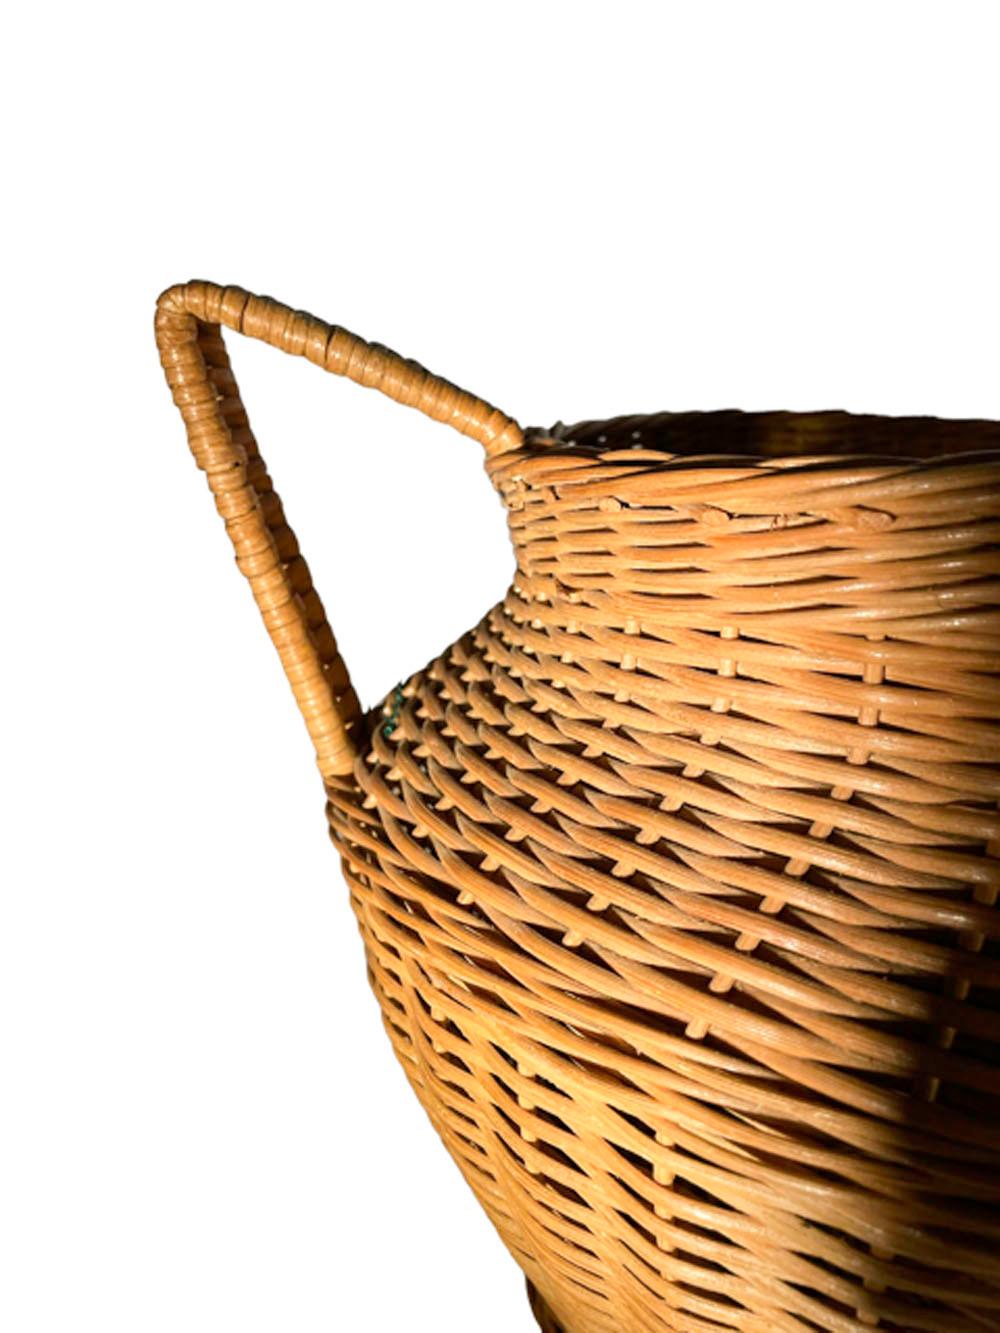 Large Art Deco Wicker Handled Cachepot Retaining Its Haywood-Wakefield Label For Sale 1